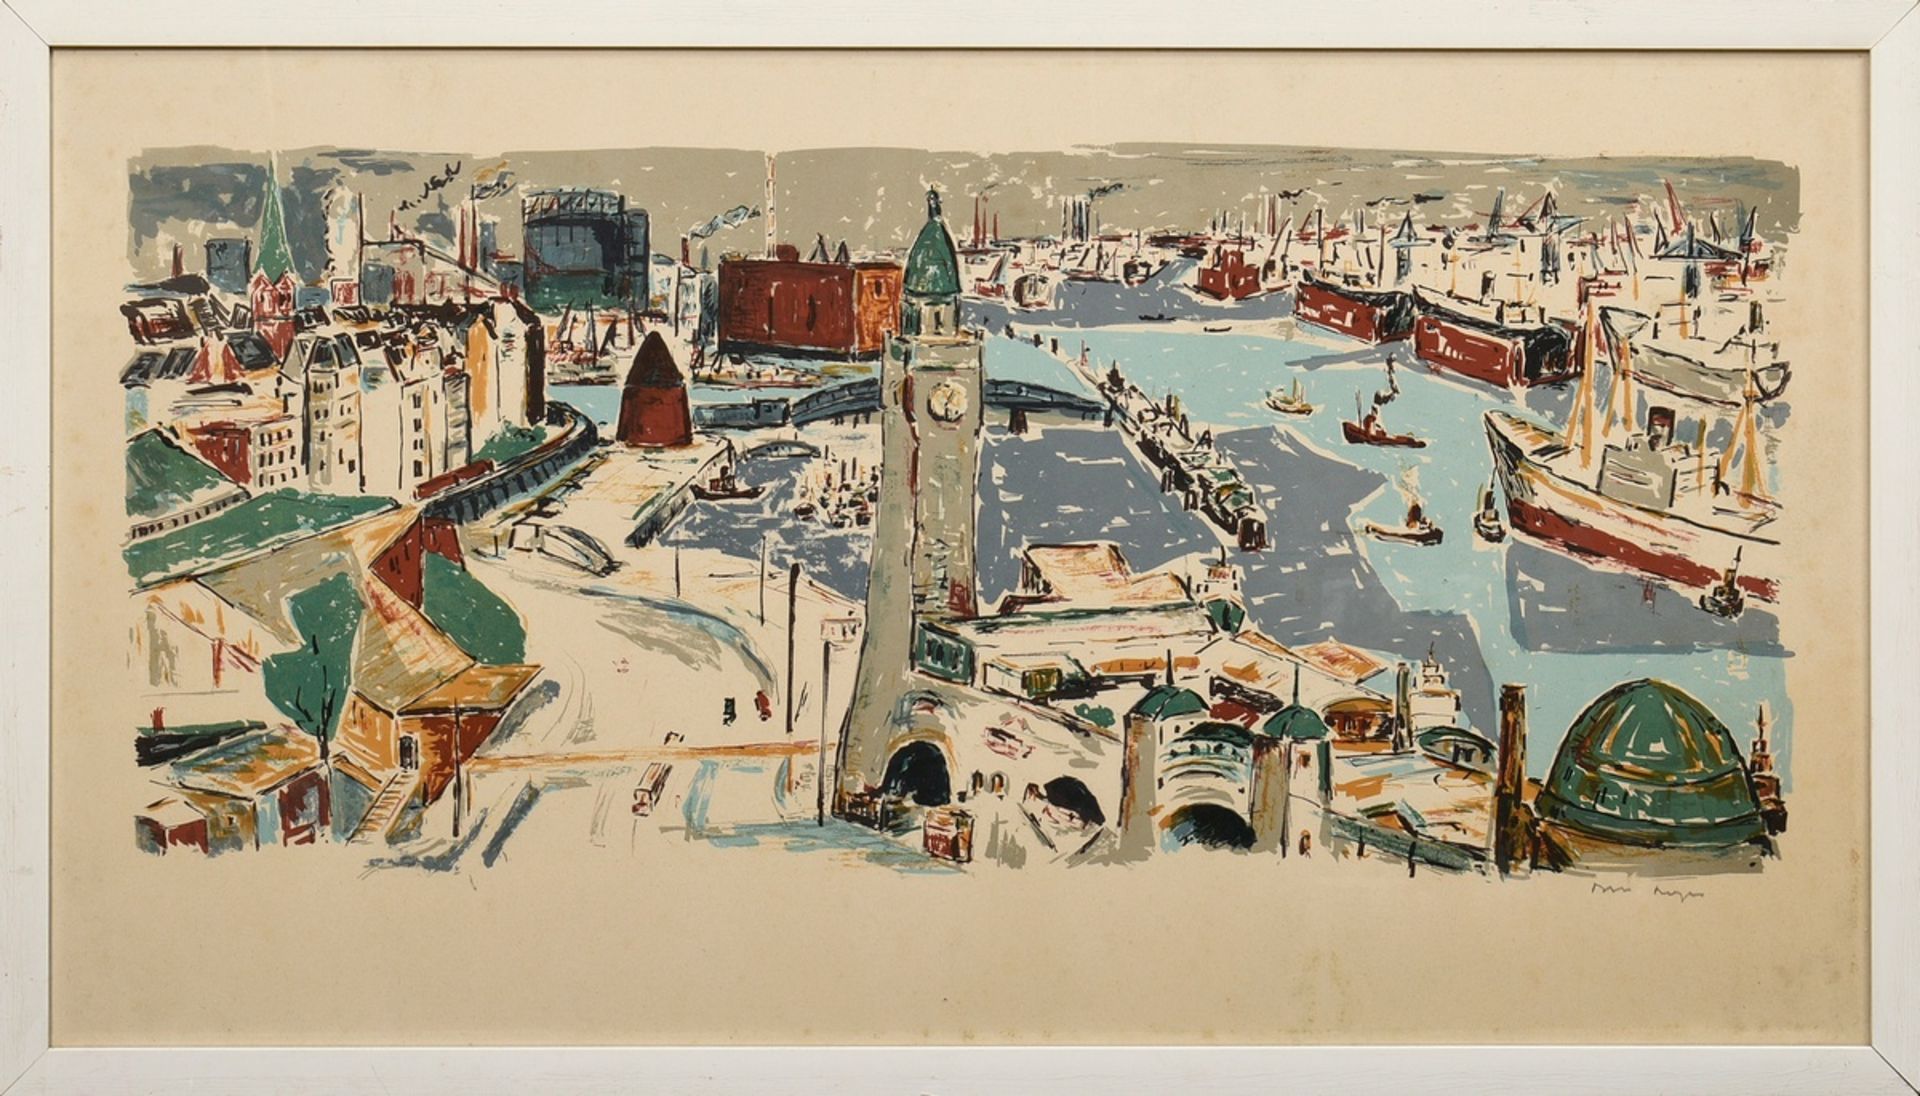 Hops, Tom (1906-1976) "Hamburg Harbour", colour lithograph, sign. b.r., verso adhesive label "Kunst - Image 2 of 3